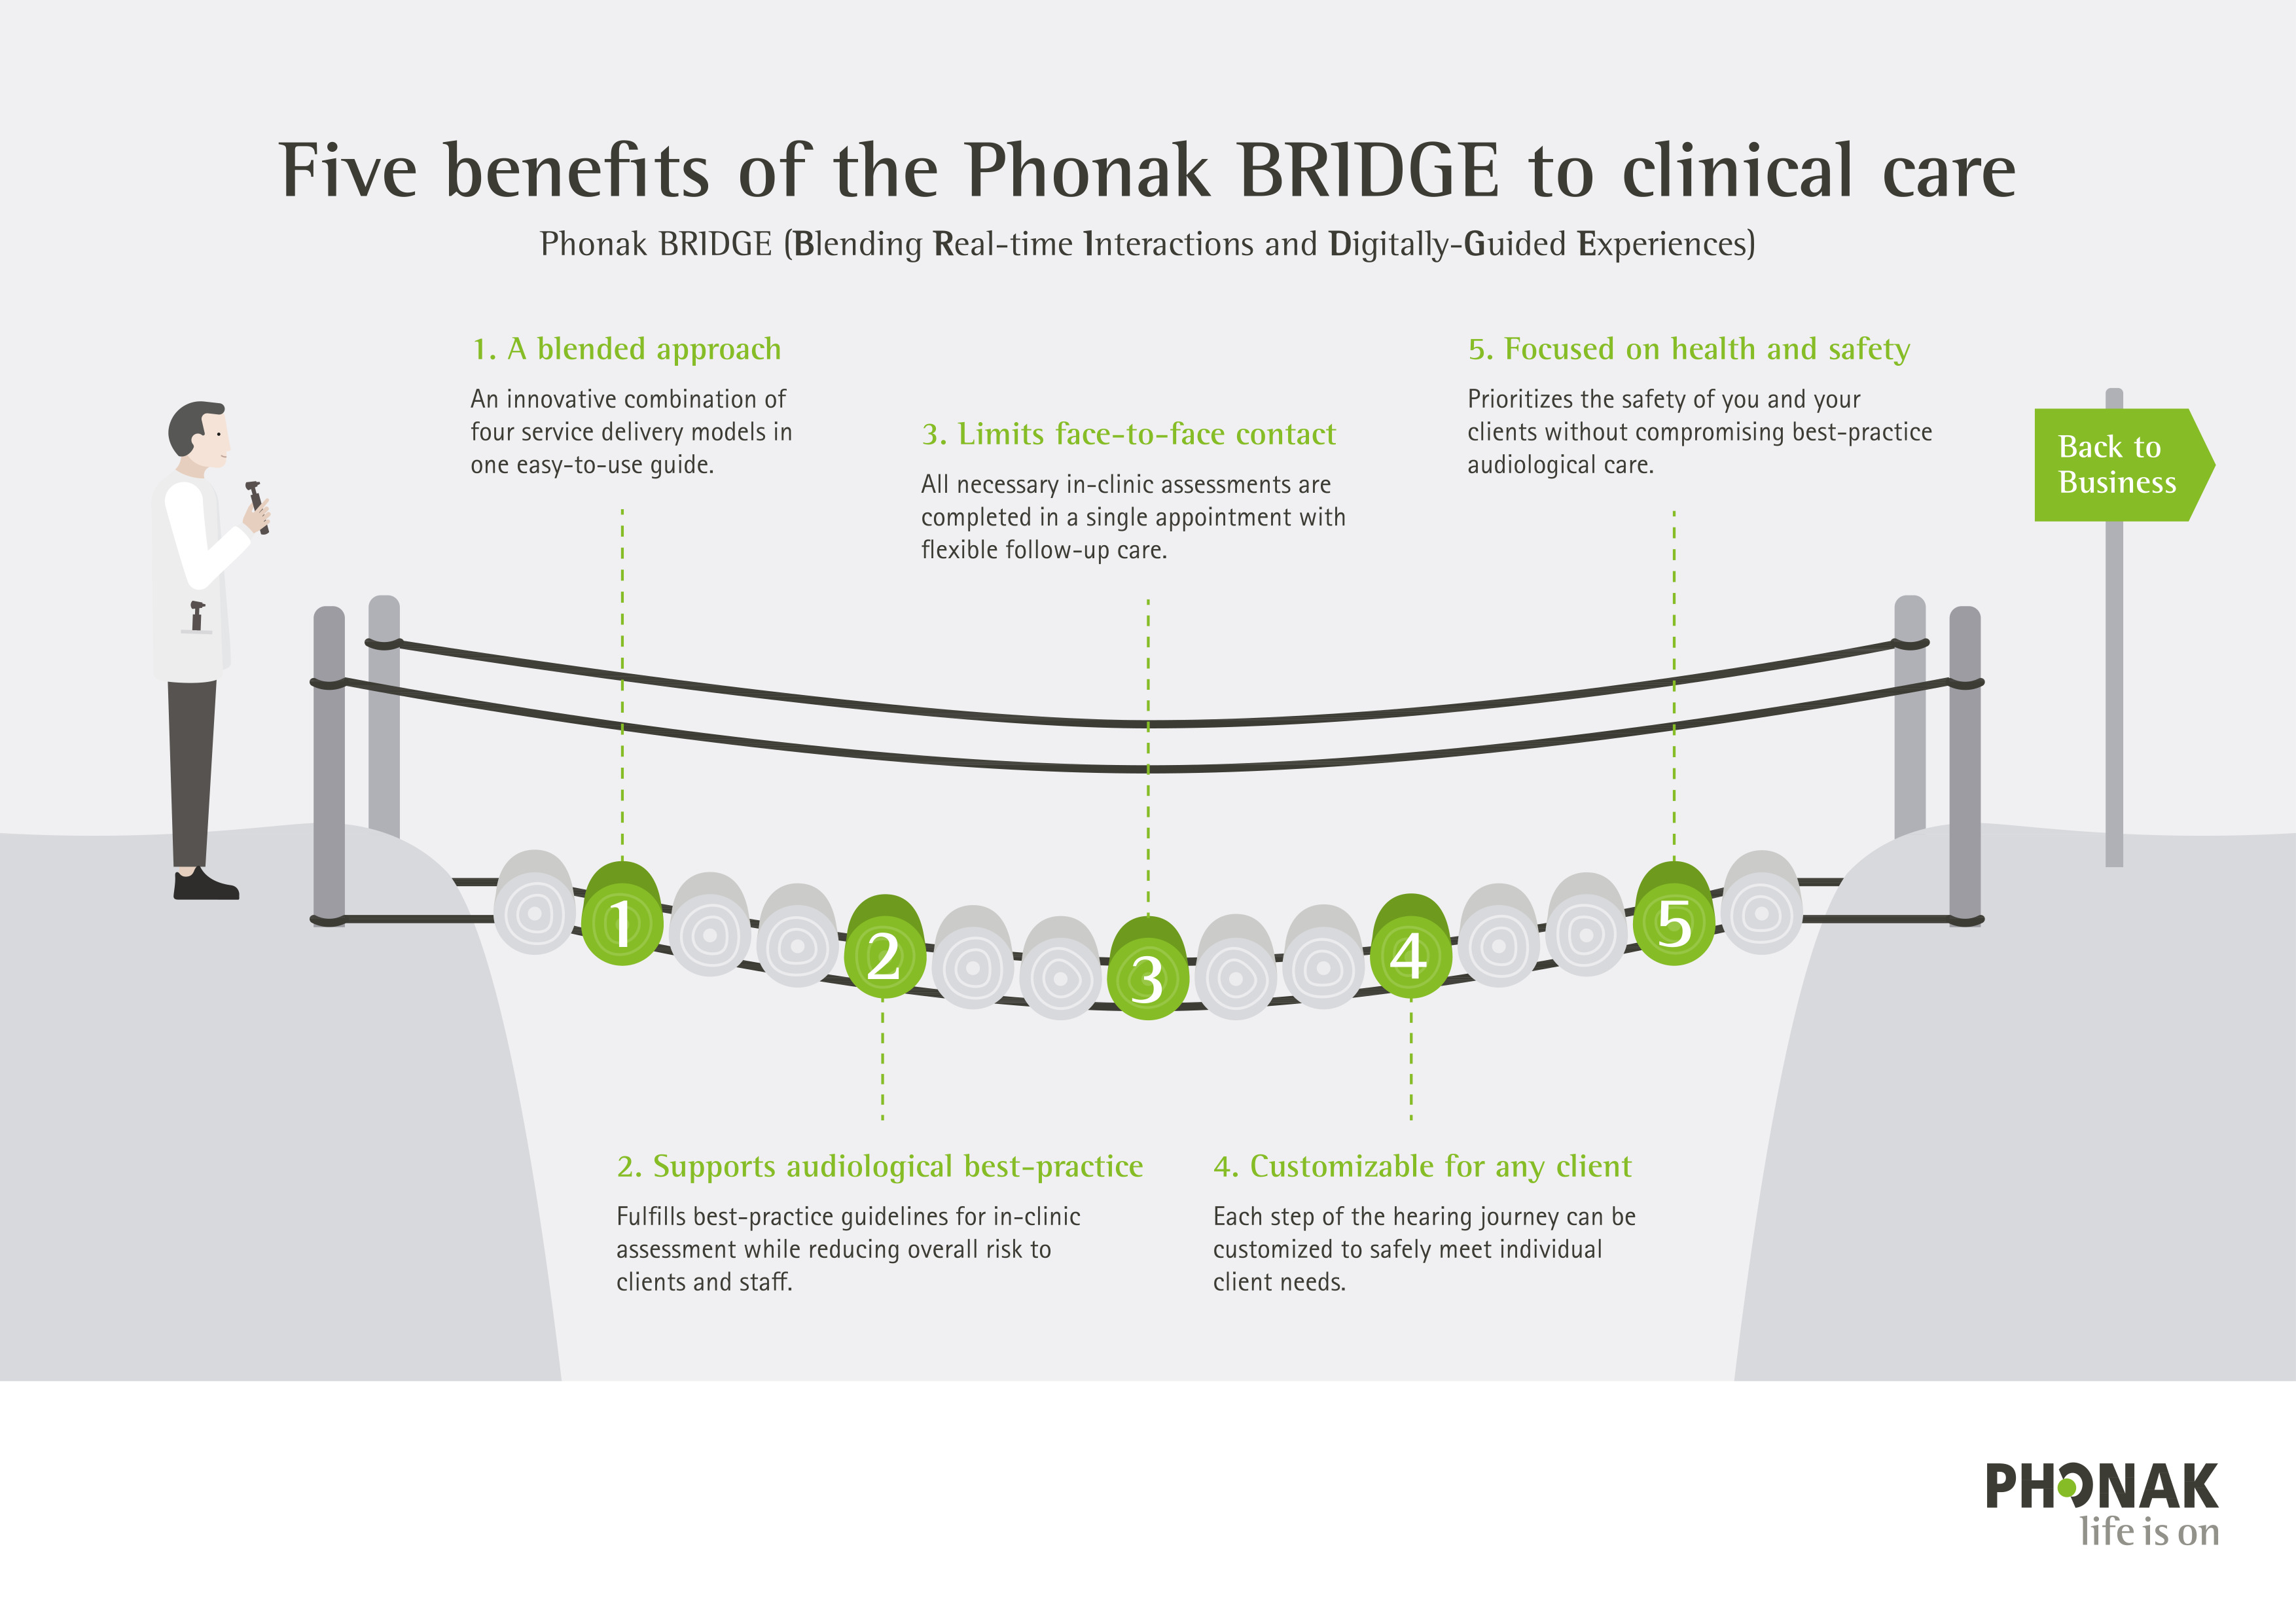 Benefits of Phonak BRIDGE to clinical care infographic